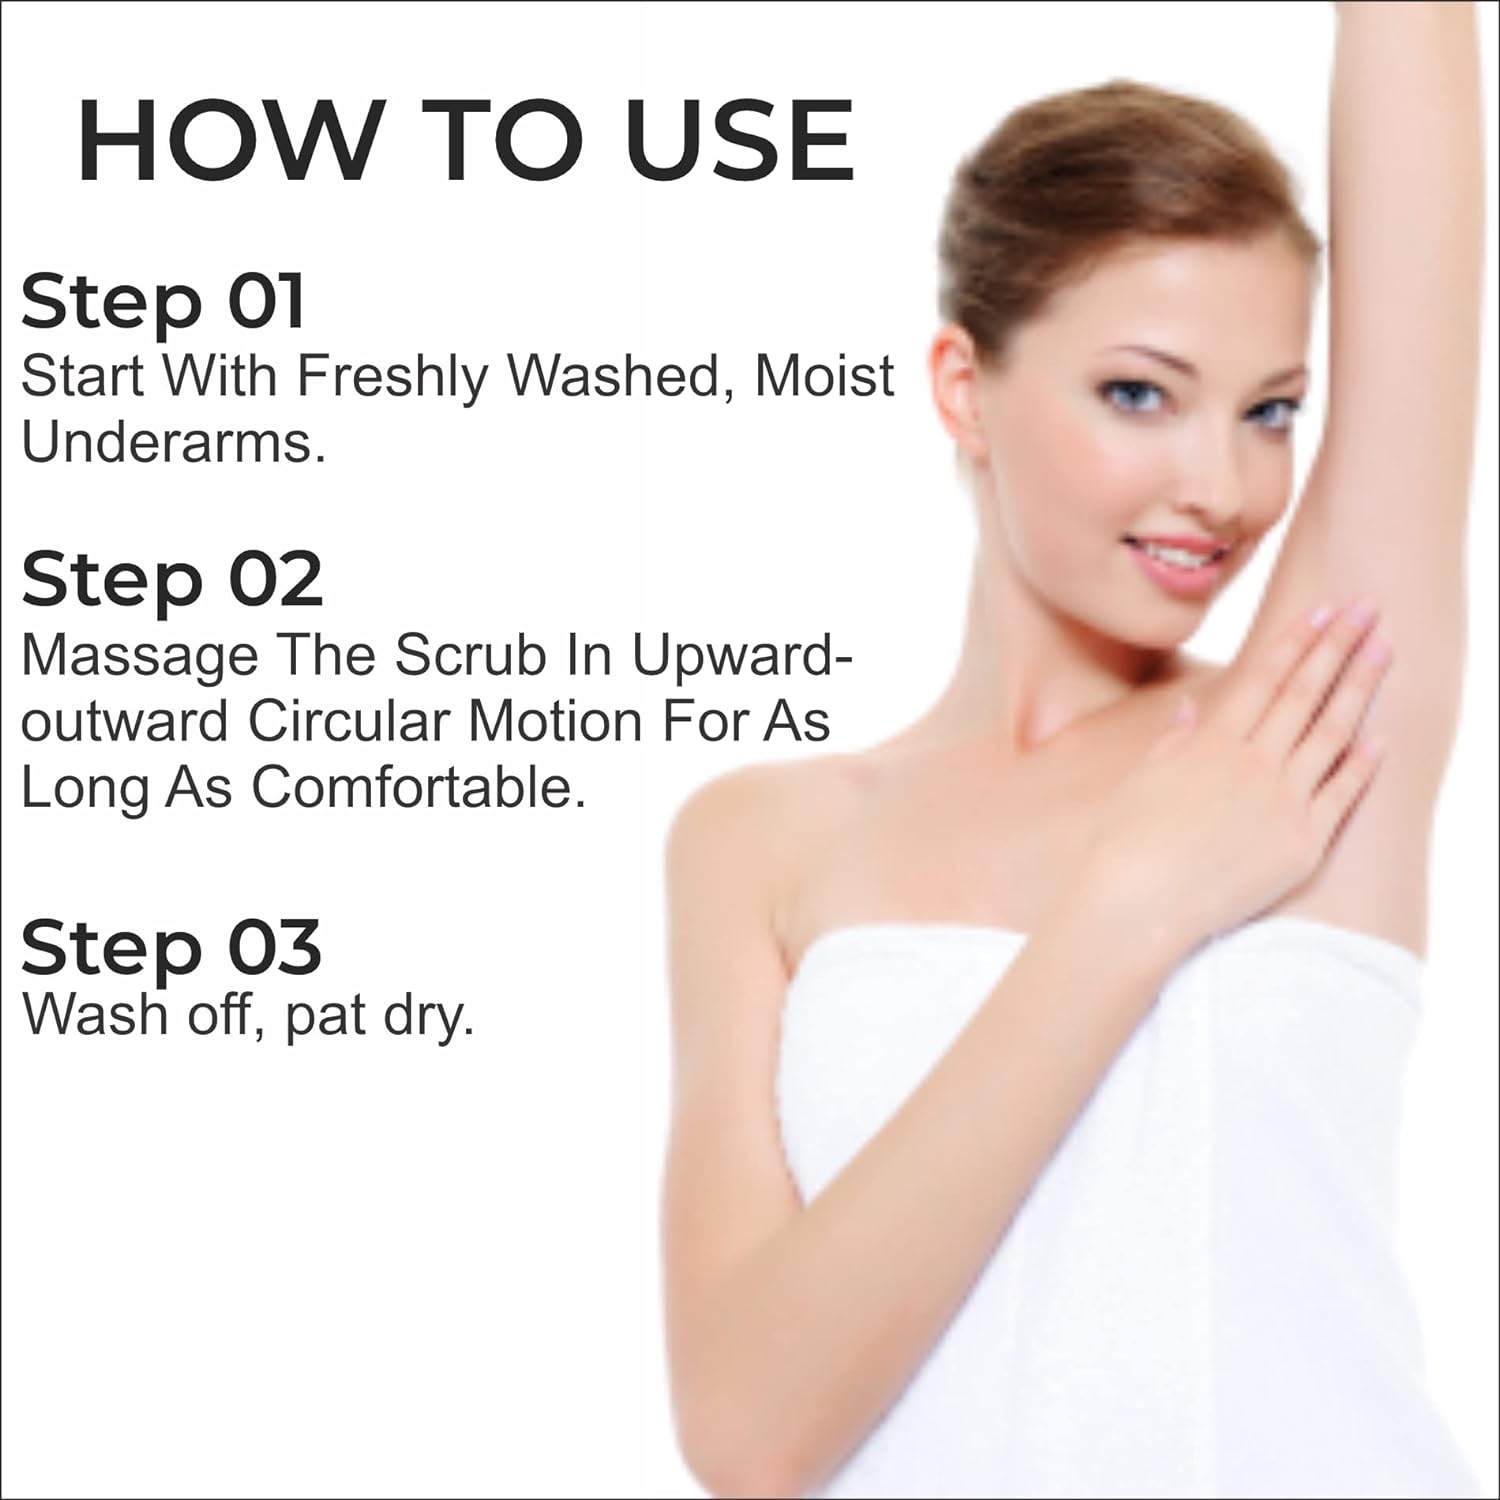 How to use of Under Arm Whitening Scrub 